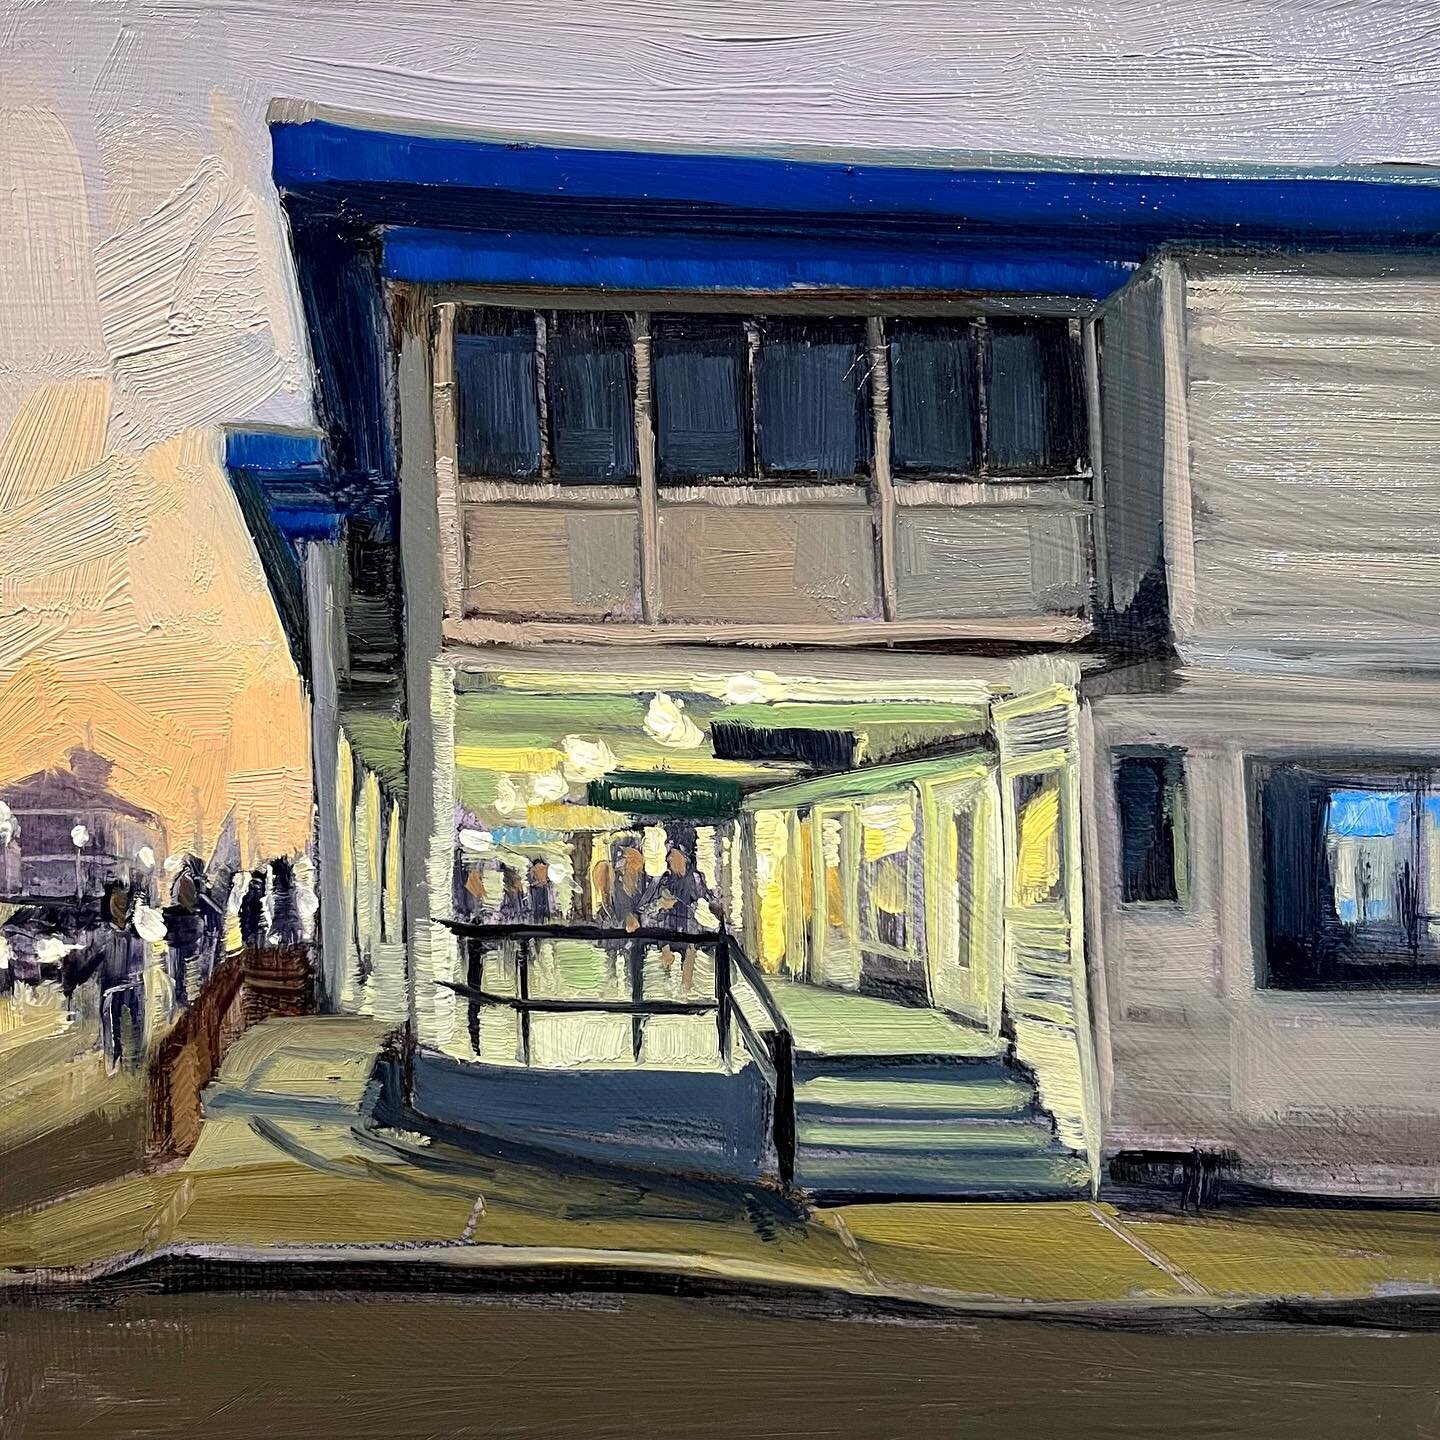 I love this wonky old place. Can&rsquo;t wait to walk the strip this summer, eating beach pizza and playing video games with the sound of the ocean everywhere! Hampton Beach Casino | 8&rdquo;x8&rdquo; | Oil on panel ☀️🍭☀️🔴SOLD #hamptonbeachnh #summ